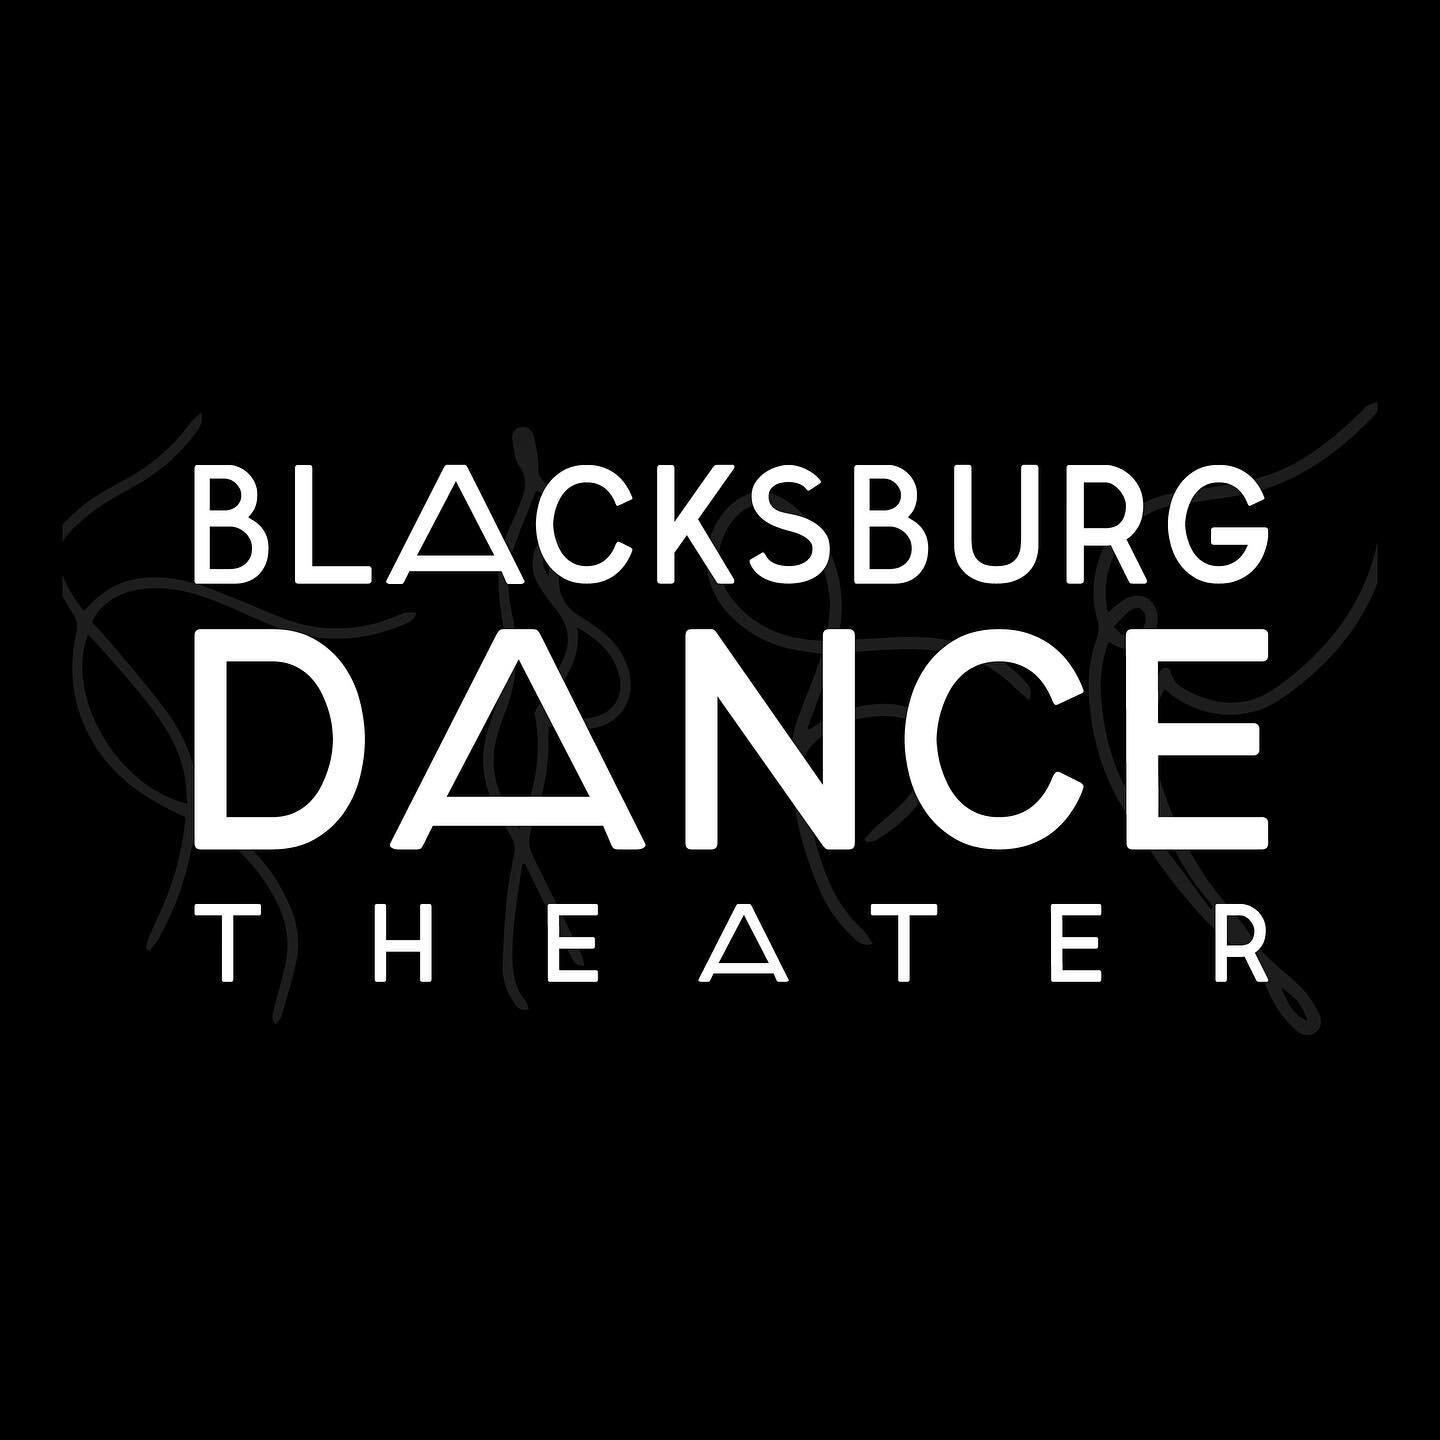 Hey friends! We&rsquo;ve been on a social media hiatus this summer while we worked on future visioning and a big rebrand, and we&rsquo;re back with a new name and shiny new logo: New River Moving Arts is now Blacksburg Dance Theater! 

We are excited